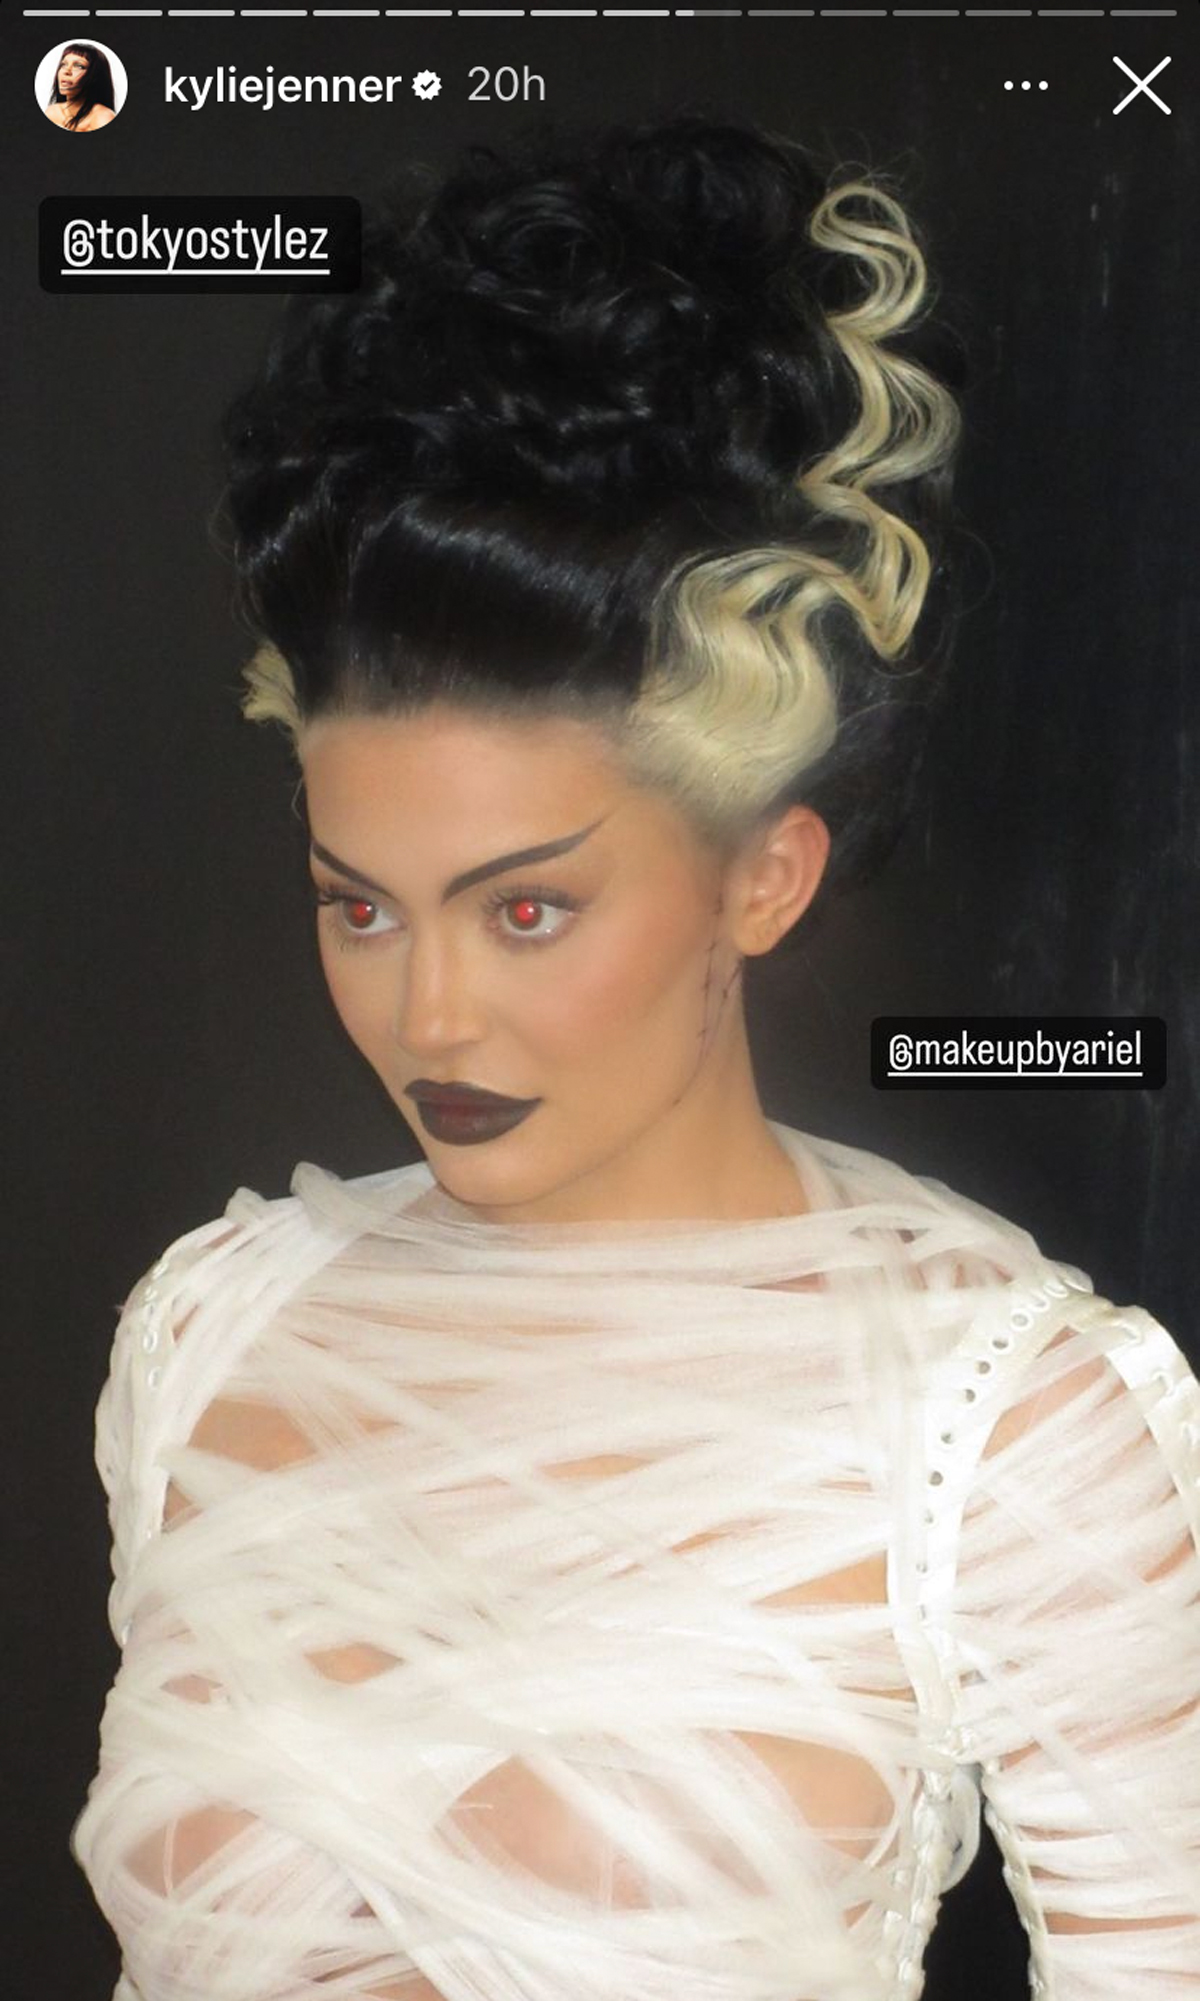 Kylie Jenner Unveils EPIC Bride Of Frankenstein Halloween Costume – See The Pics! 